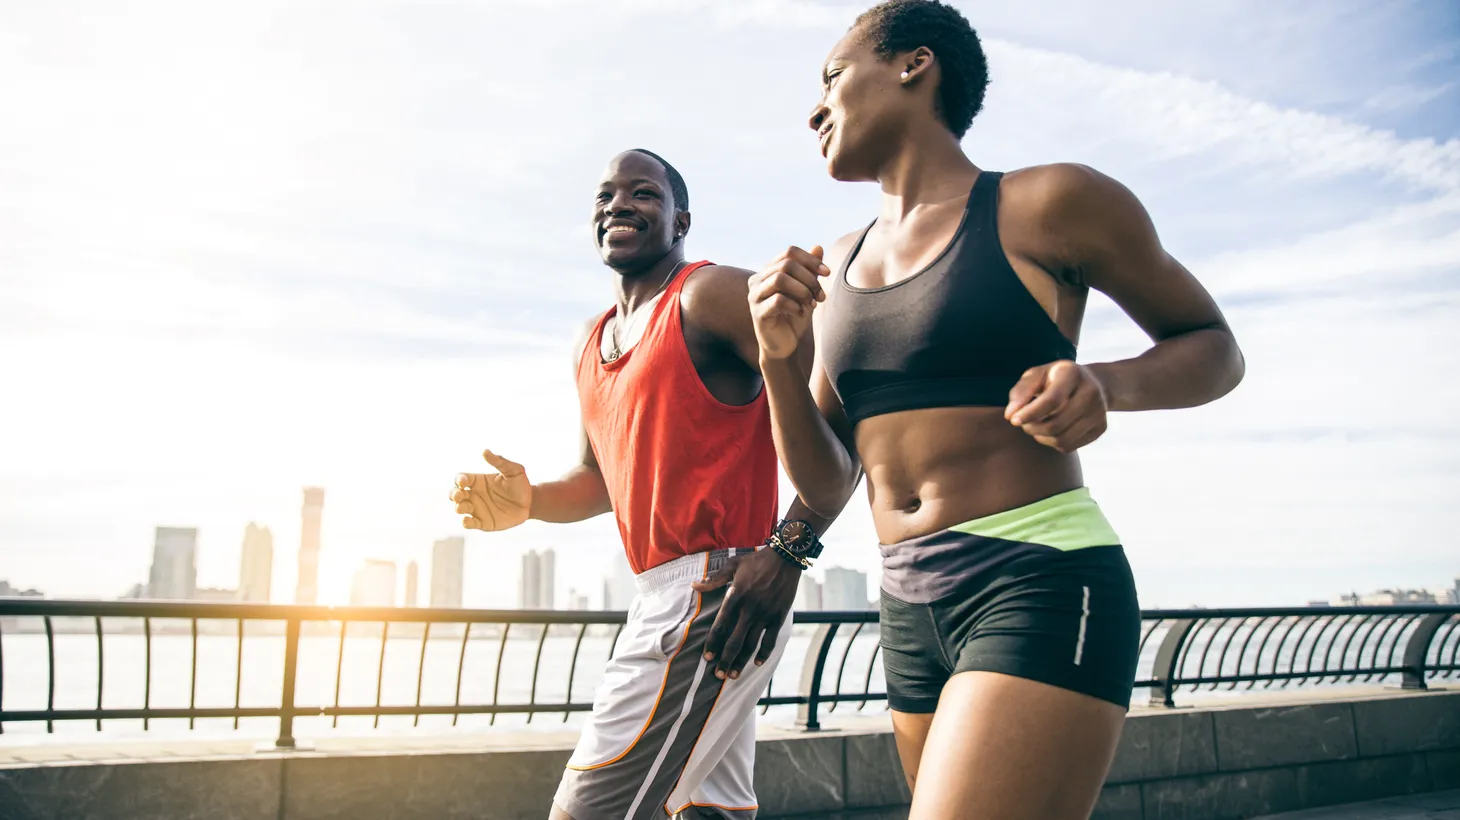 “We know women's muscles have a different muscle fiber concentration compared with men. And so there may be something about exercise that translates differently physiologically to women compared with men, and ultimately results in an overall health benefit,” says Dr. Martha Gulati, the director of Preventive Cardiology for Cedars-Sinai Medical Center.